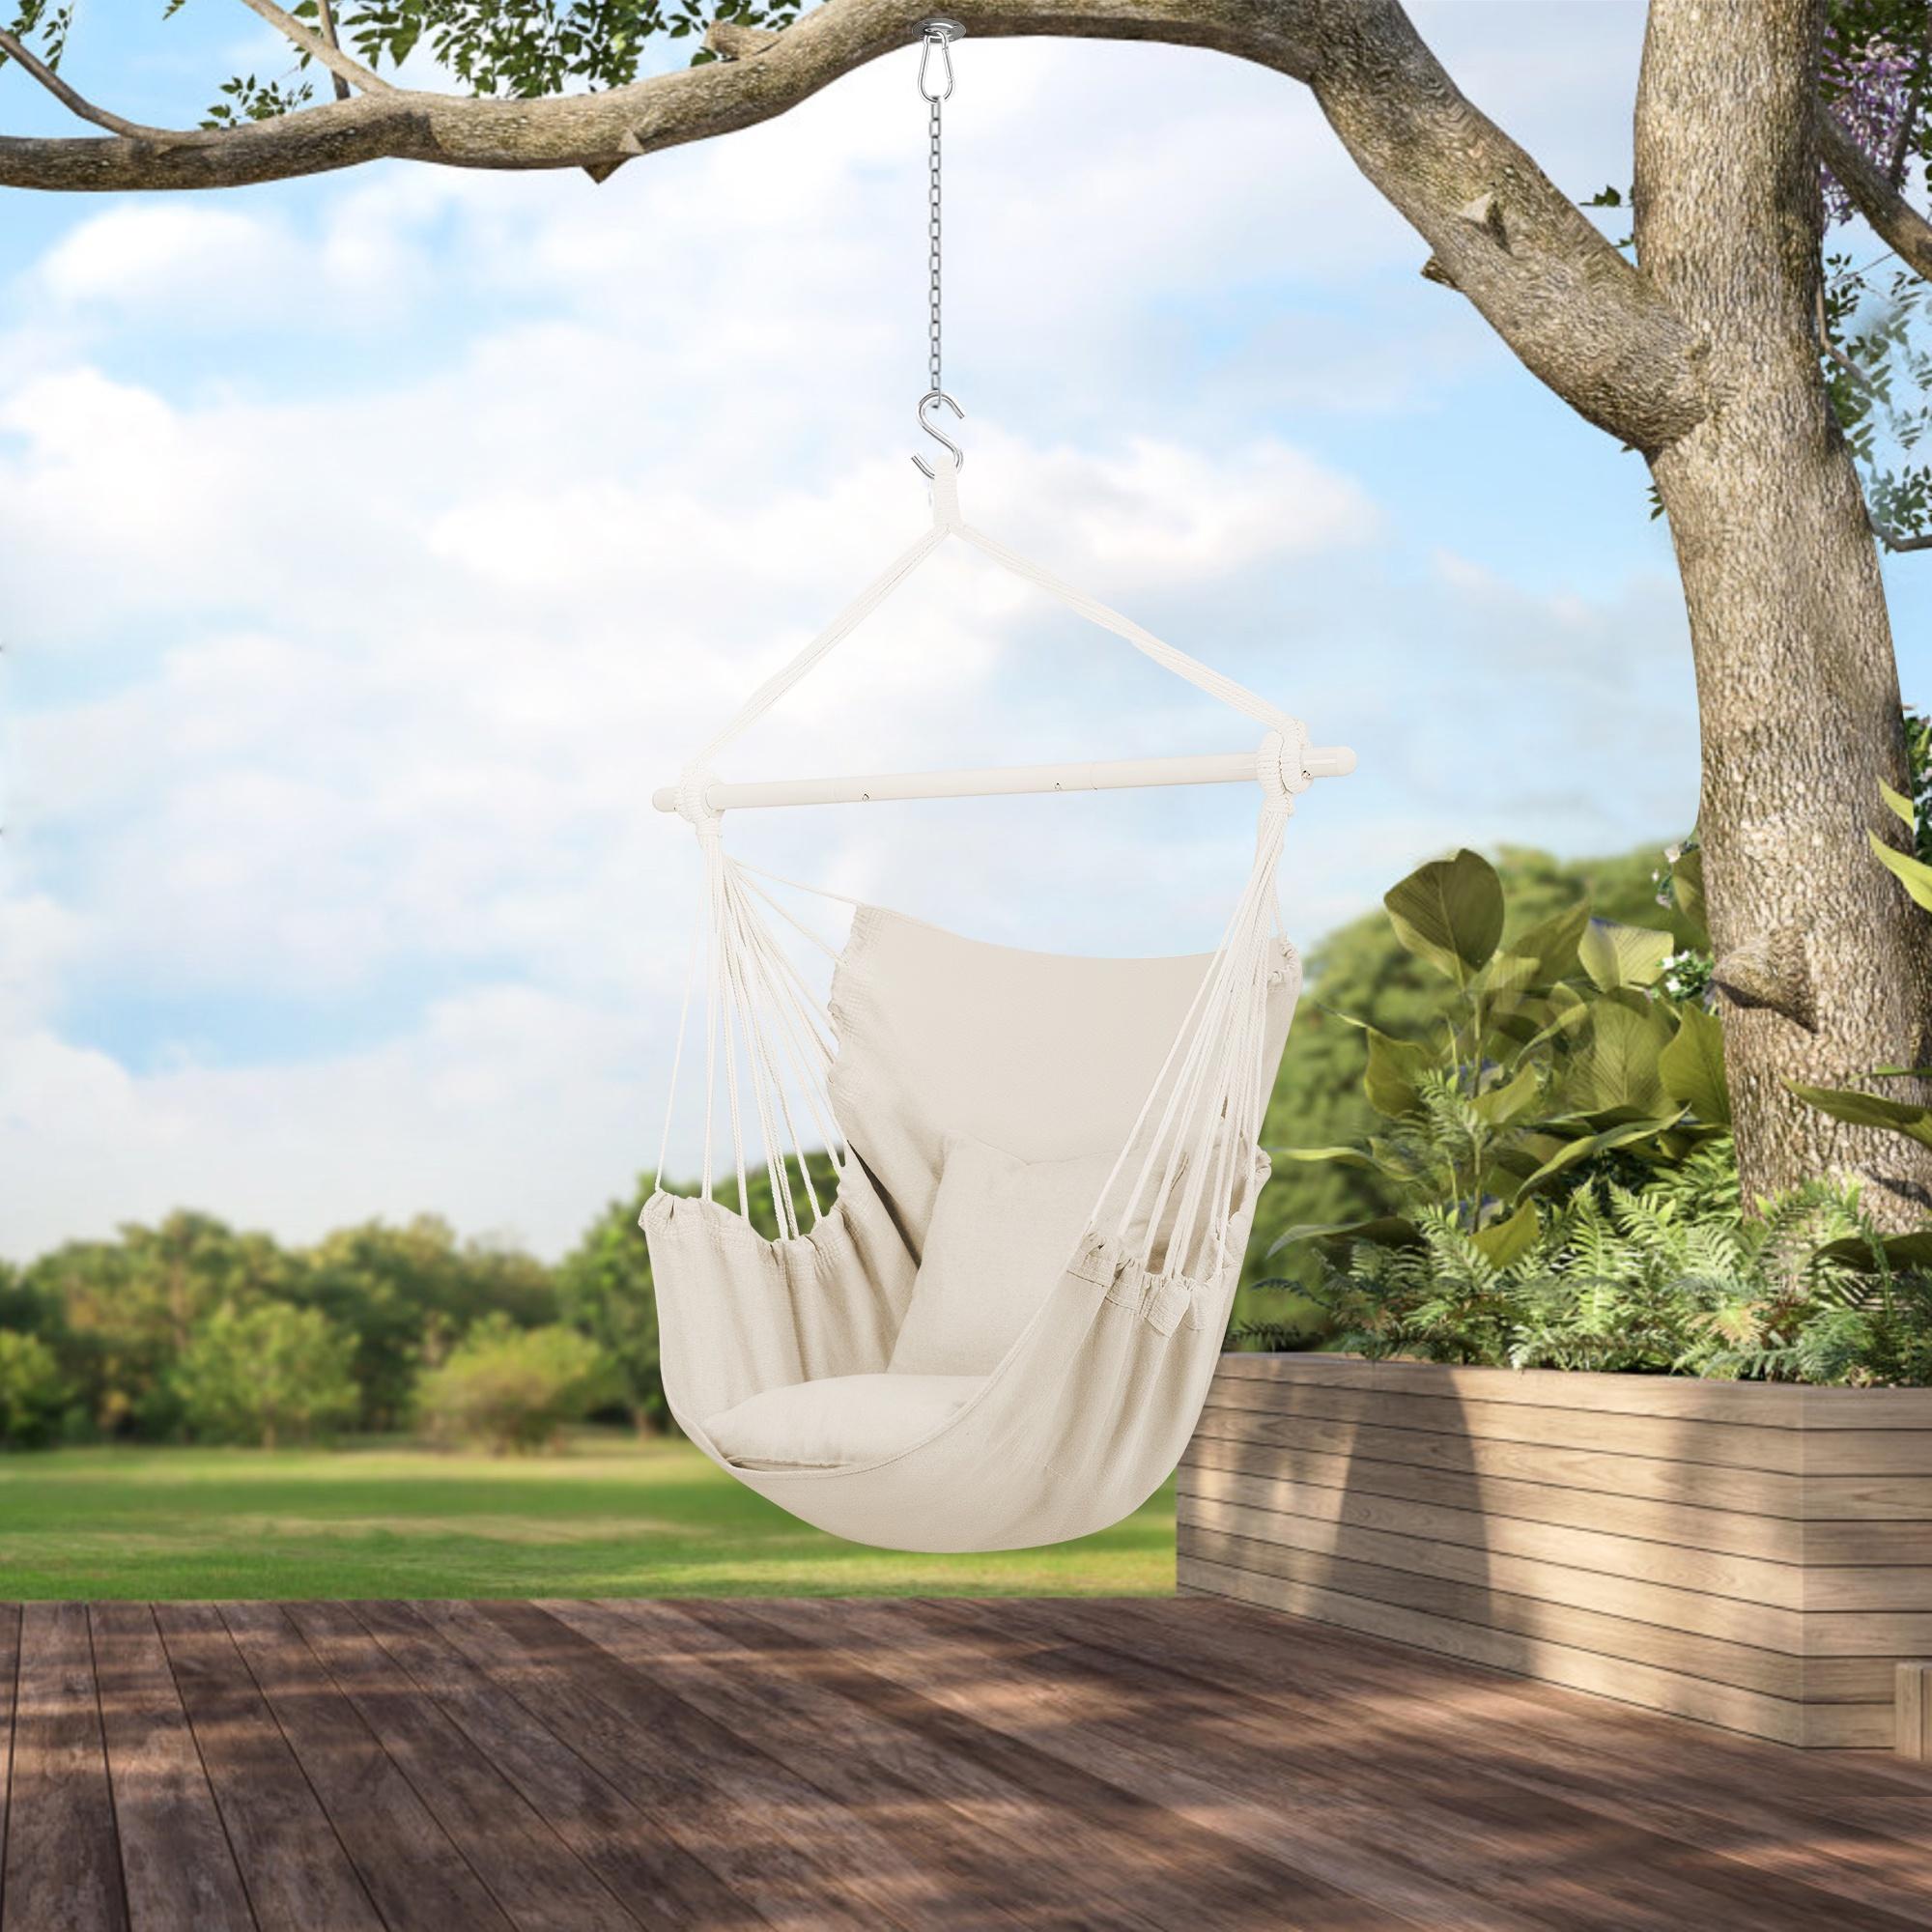 Large Hammock Chair Swing, Relax Hanging Rope Swing Chair with Detachable Metal Support Bar & Two Seat Cushions, Cotton Hammock Chair Swing Seat for Yard Bedroom Patio Porch Indoor Outdoor - image 4 of 10